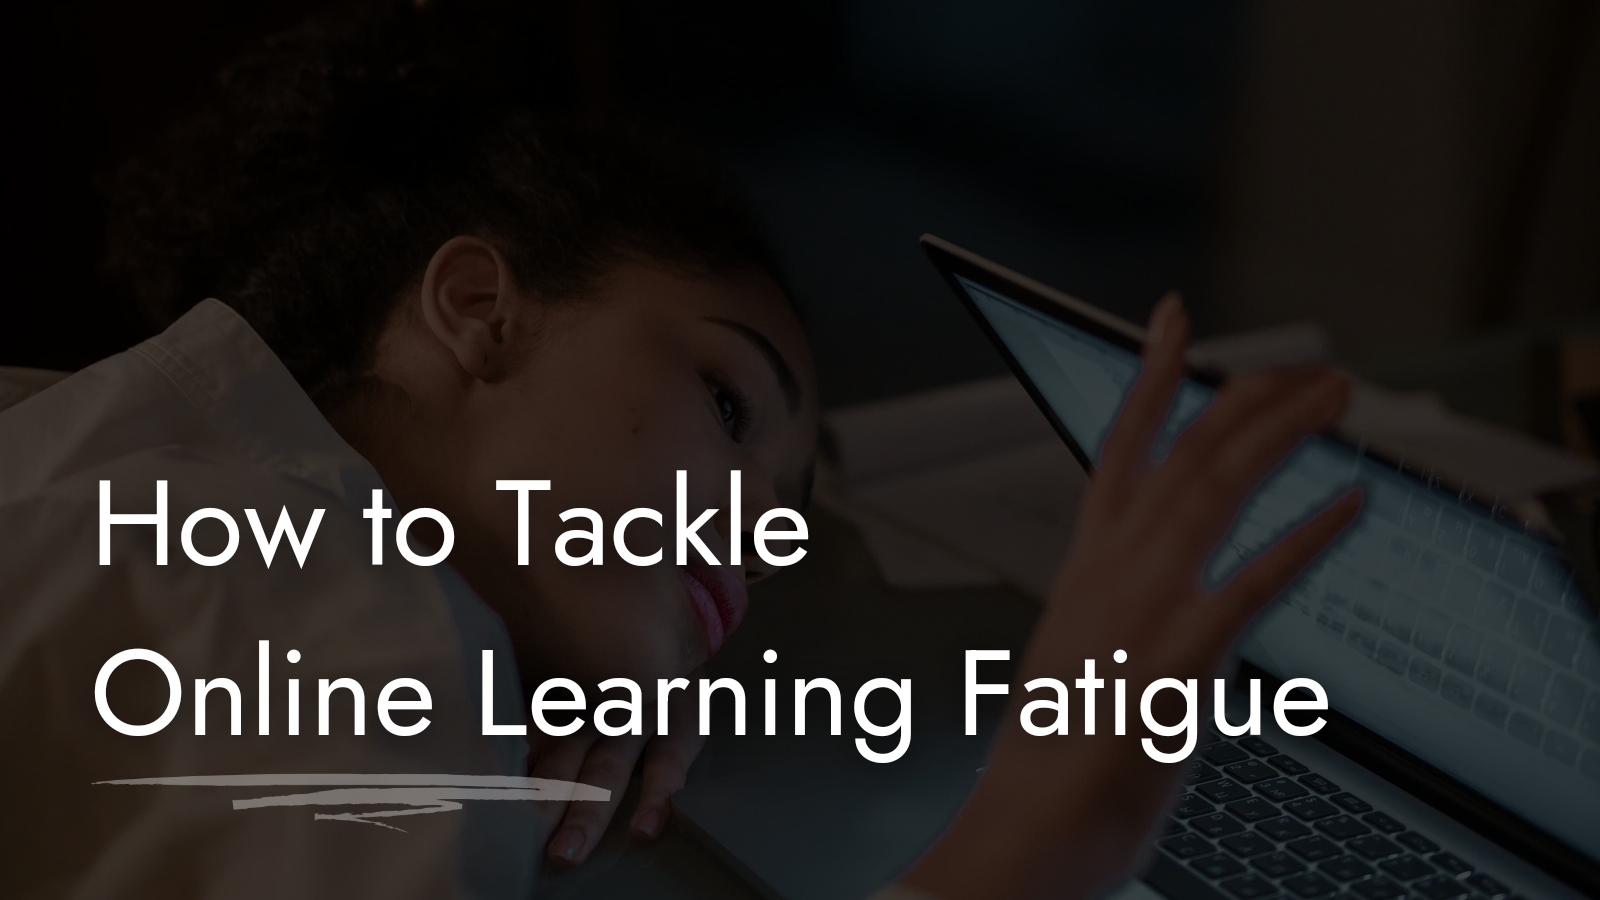 How To Tackle Online Learning Fatigue